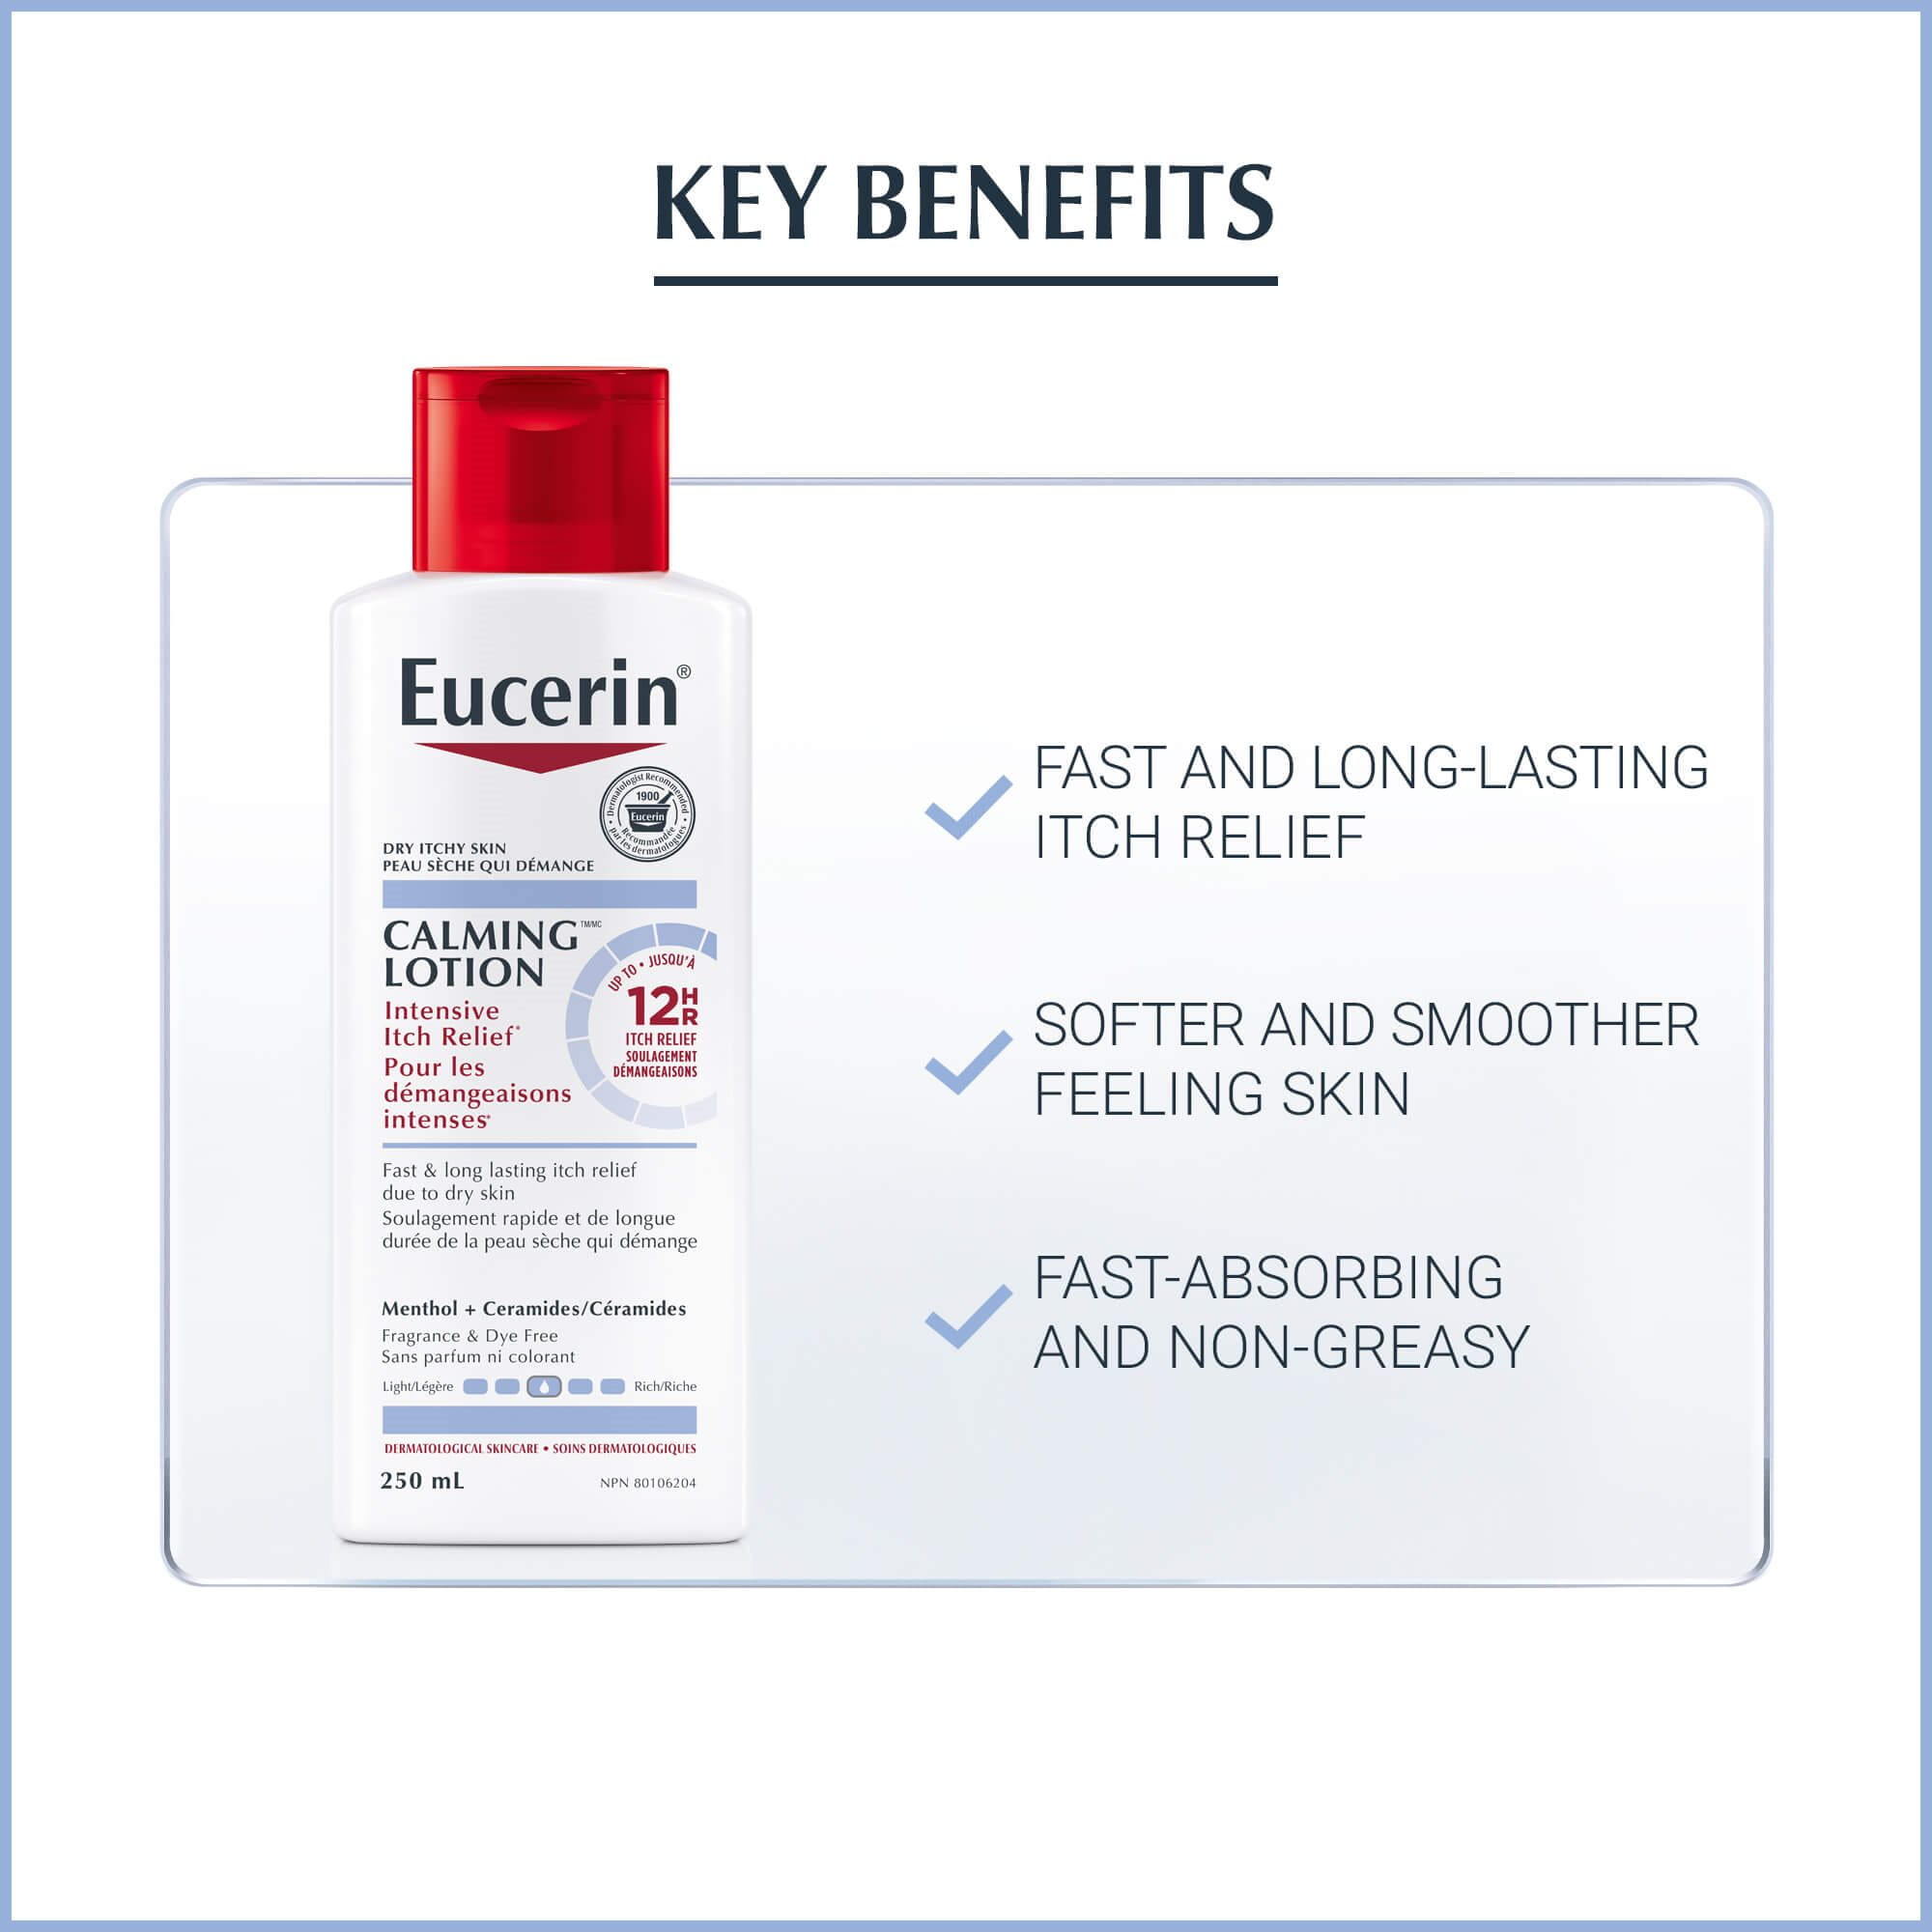 View of Eucerin Calming Lotion product size 250 mL with key benefits text against a white background.